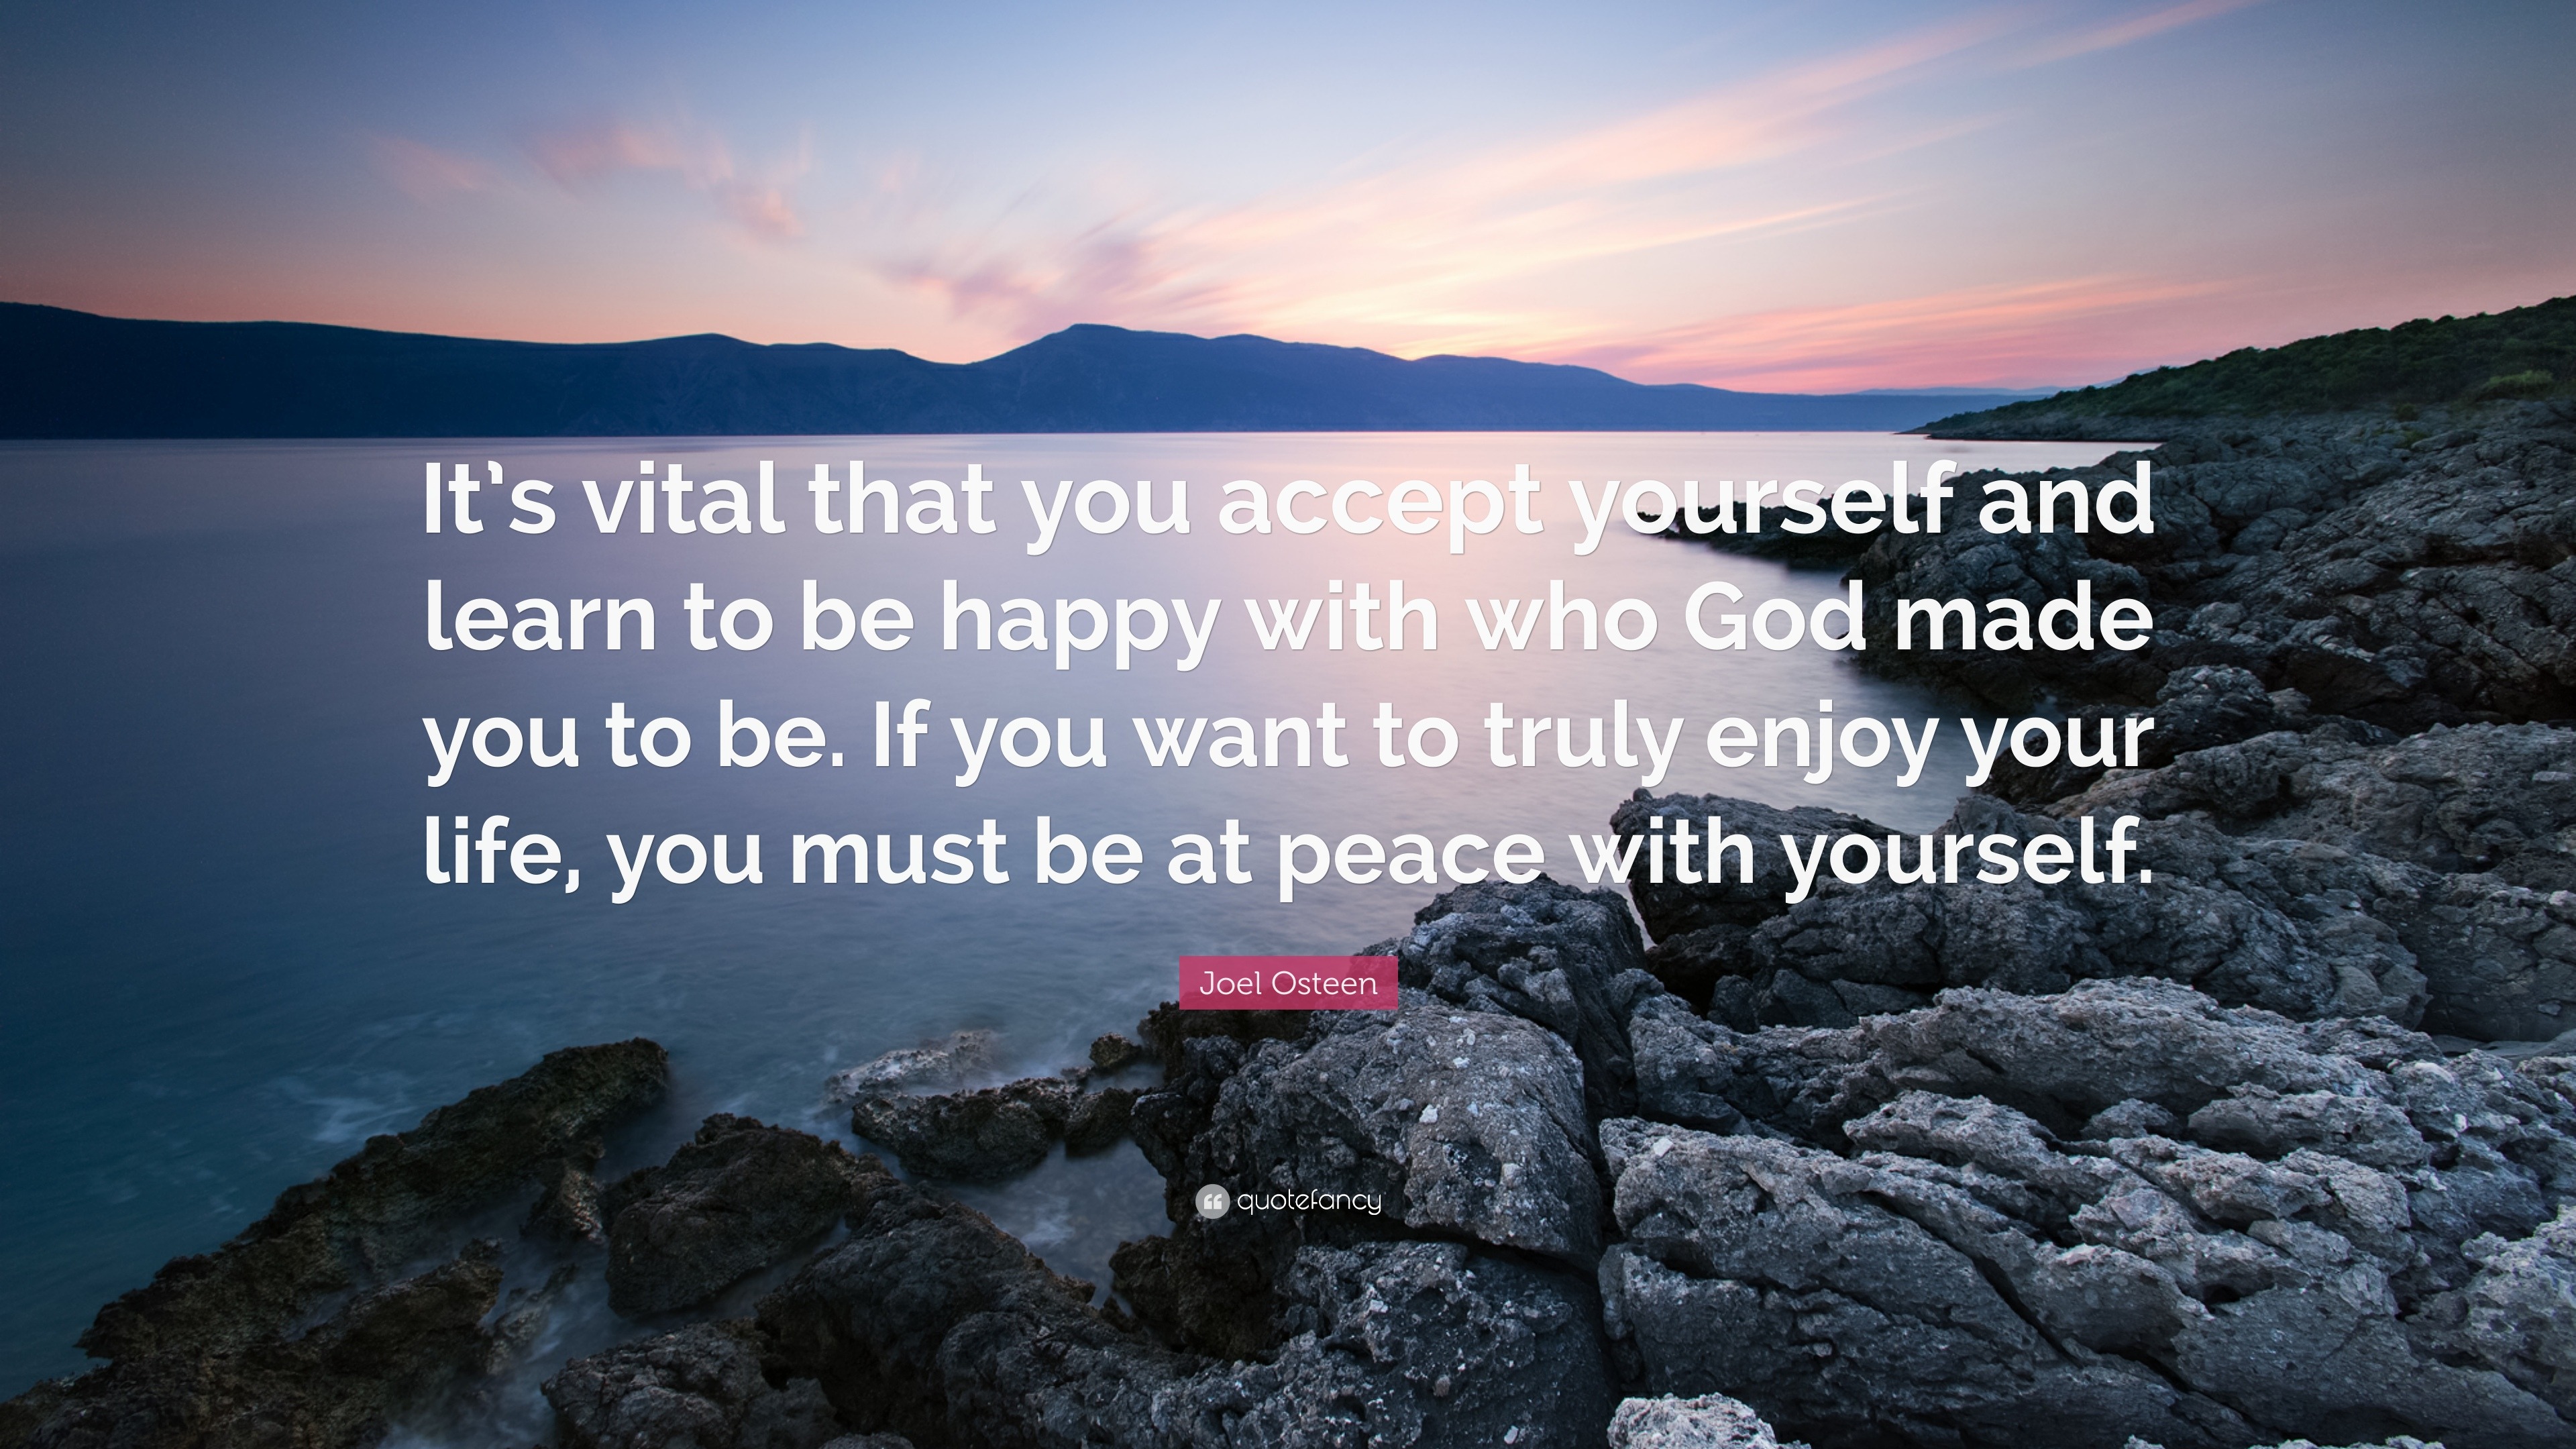 Joel Osteen Quote “It s vital that you accept yourself and learn to be happy